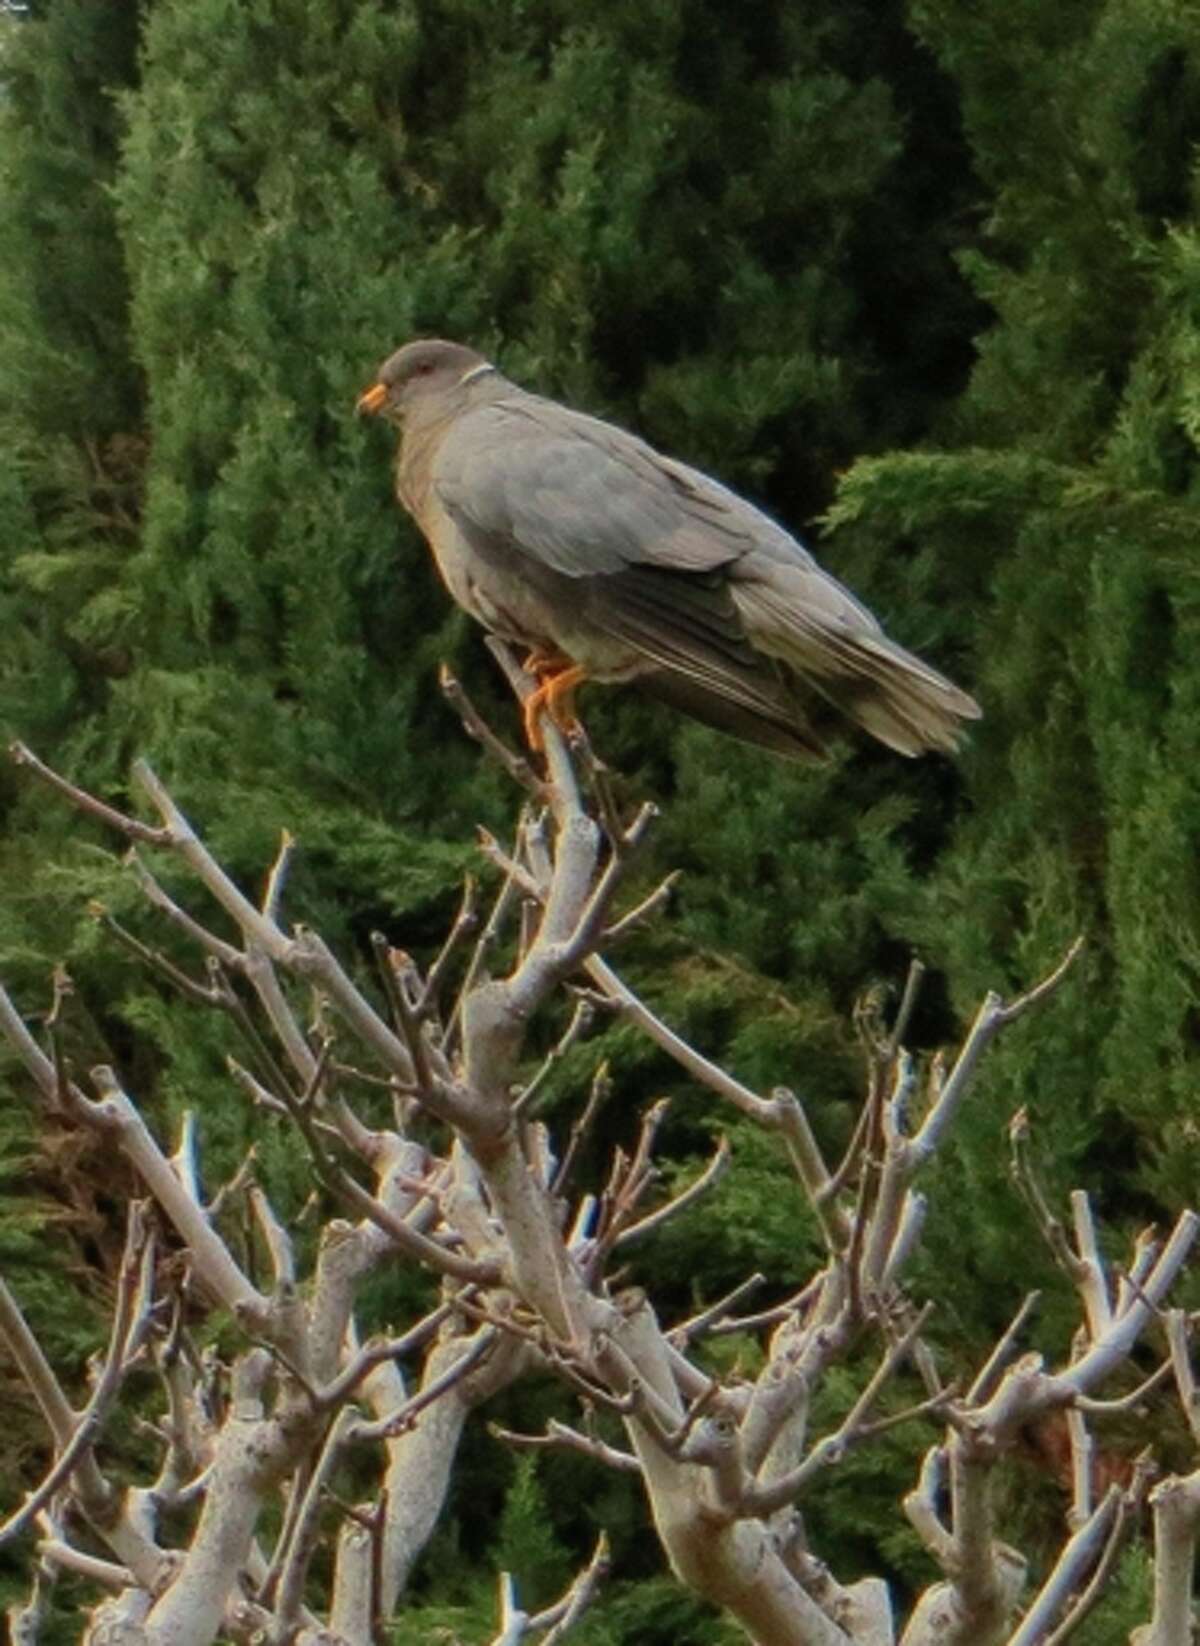 The band-tailed pigeon, California’s only native pigeon, is dwindling.